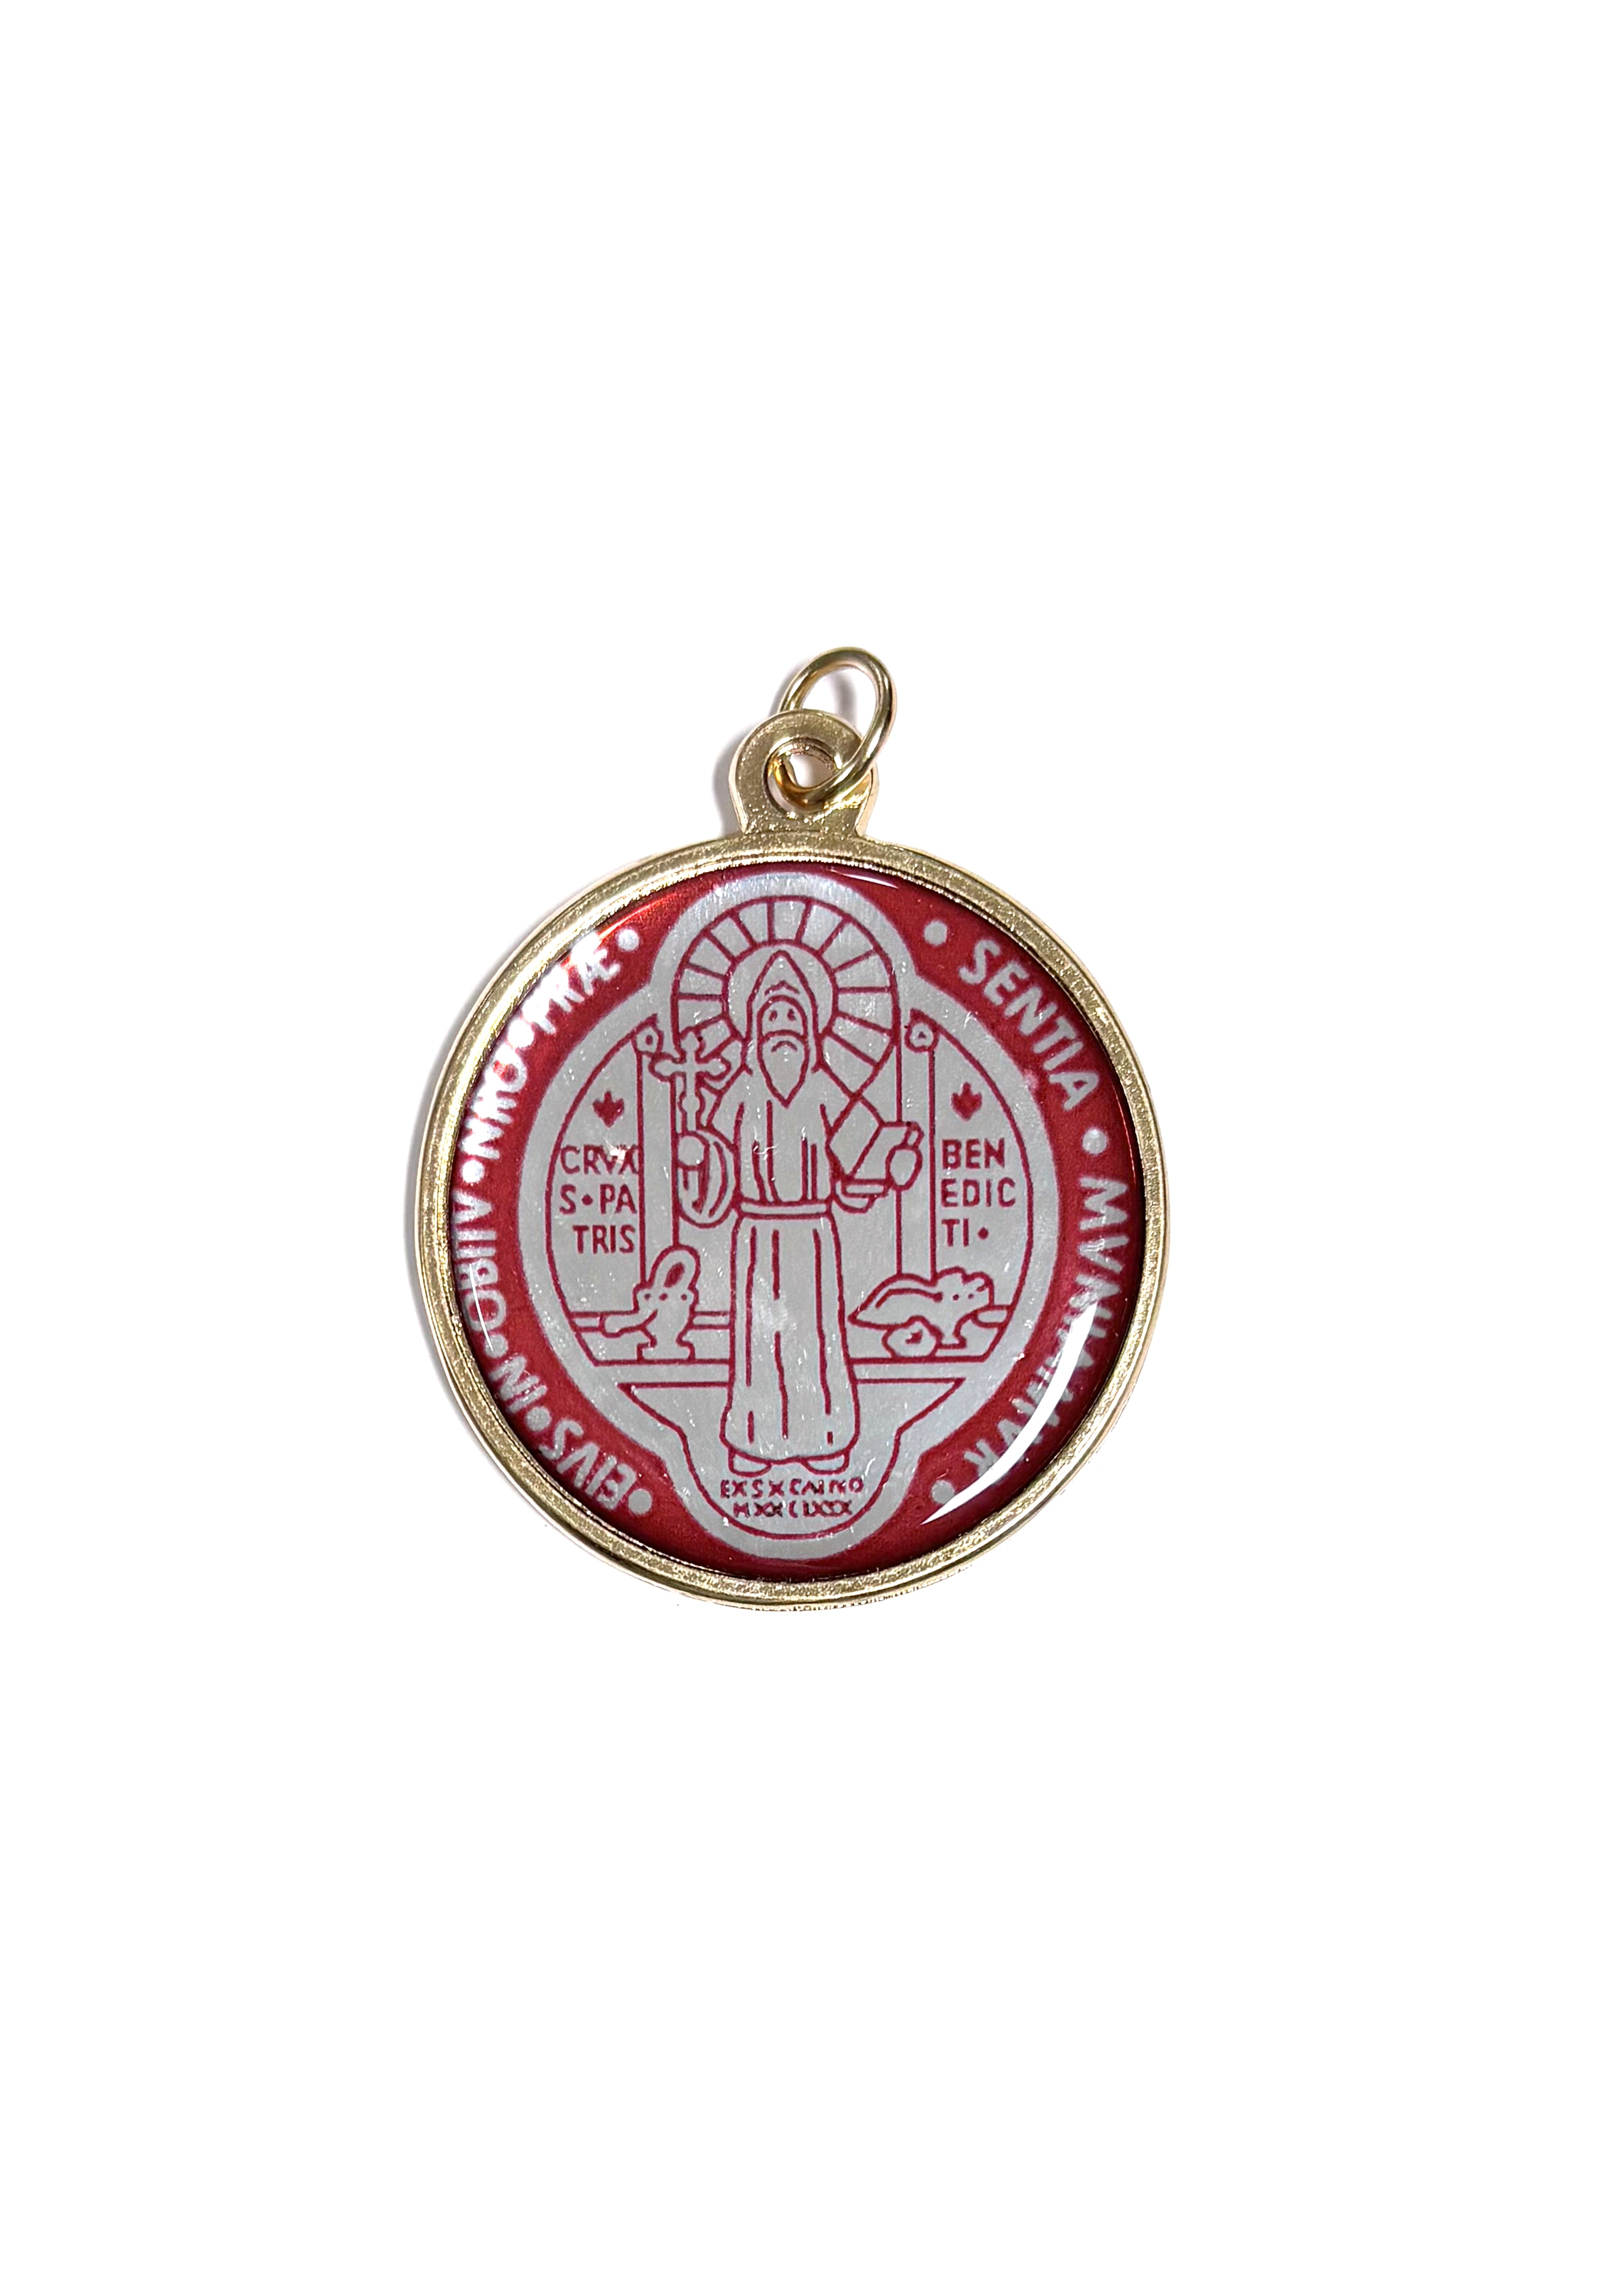 2" Saint Benedict red and gold medal